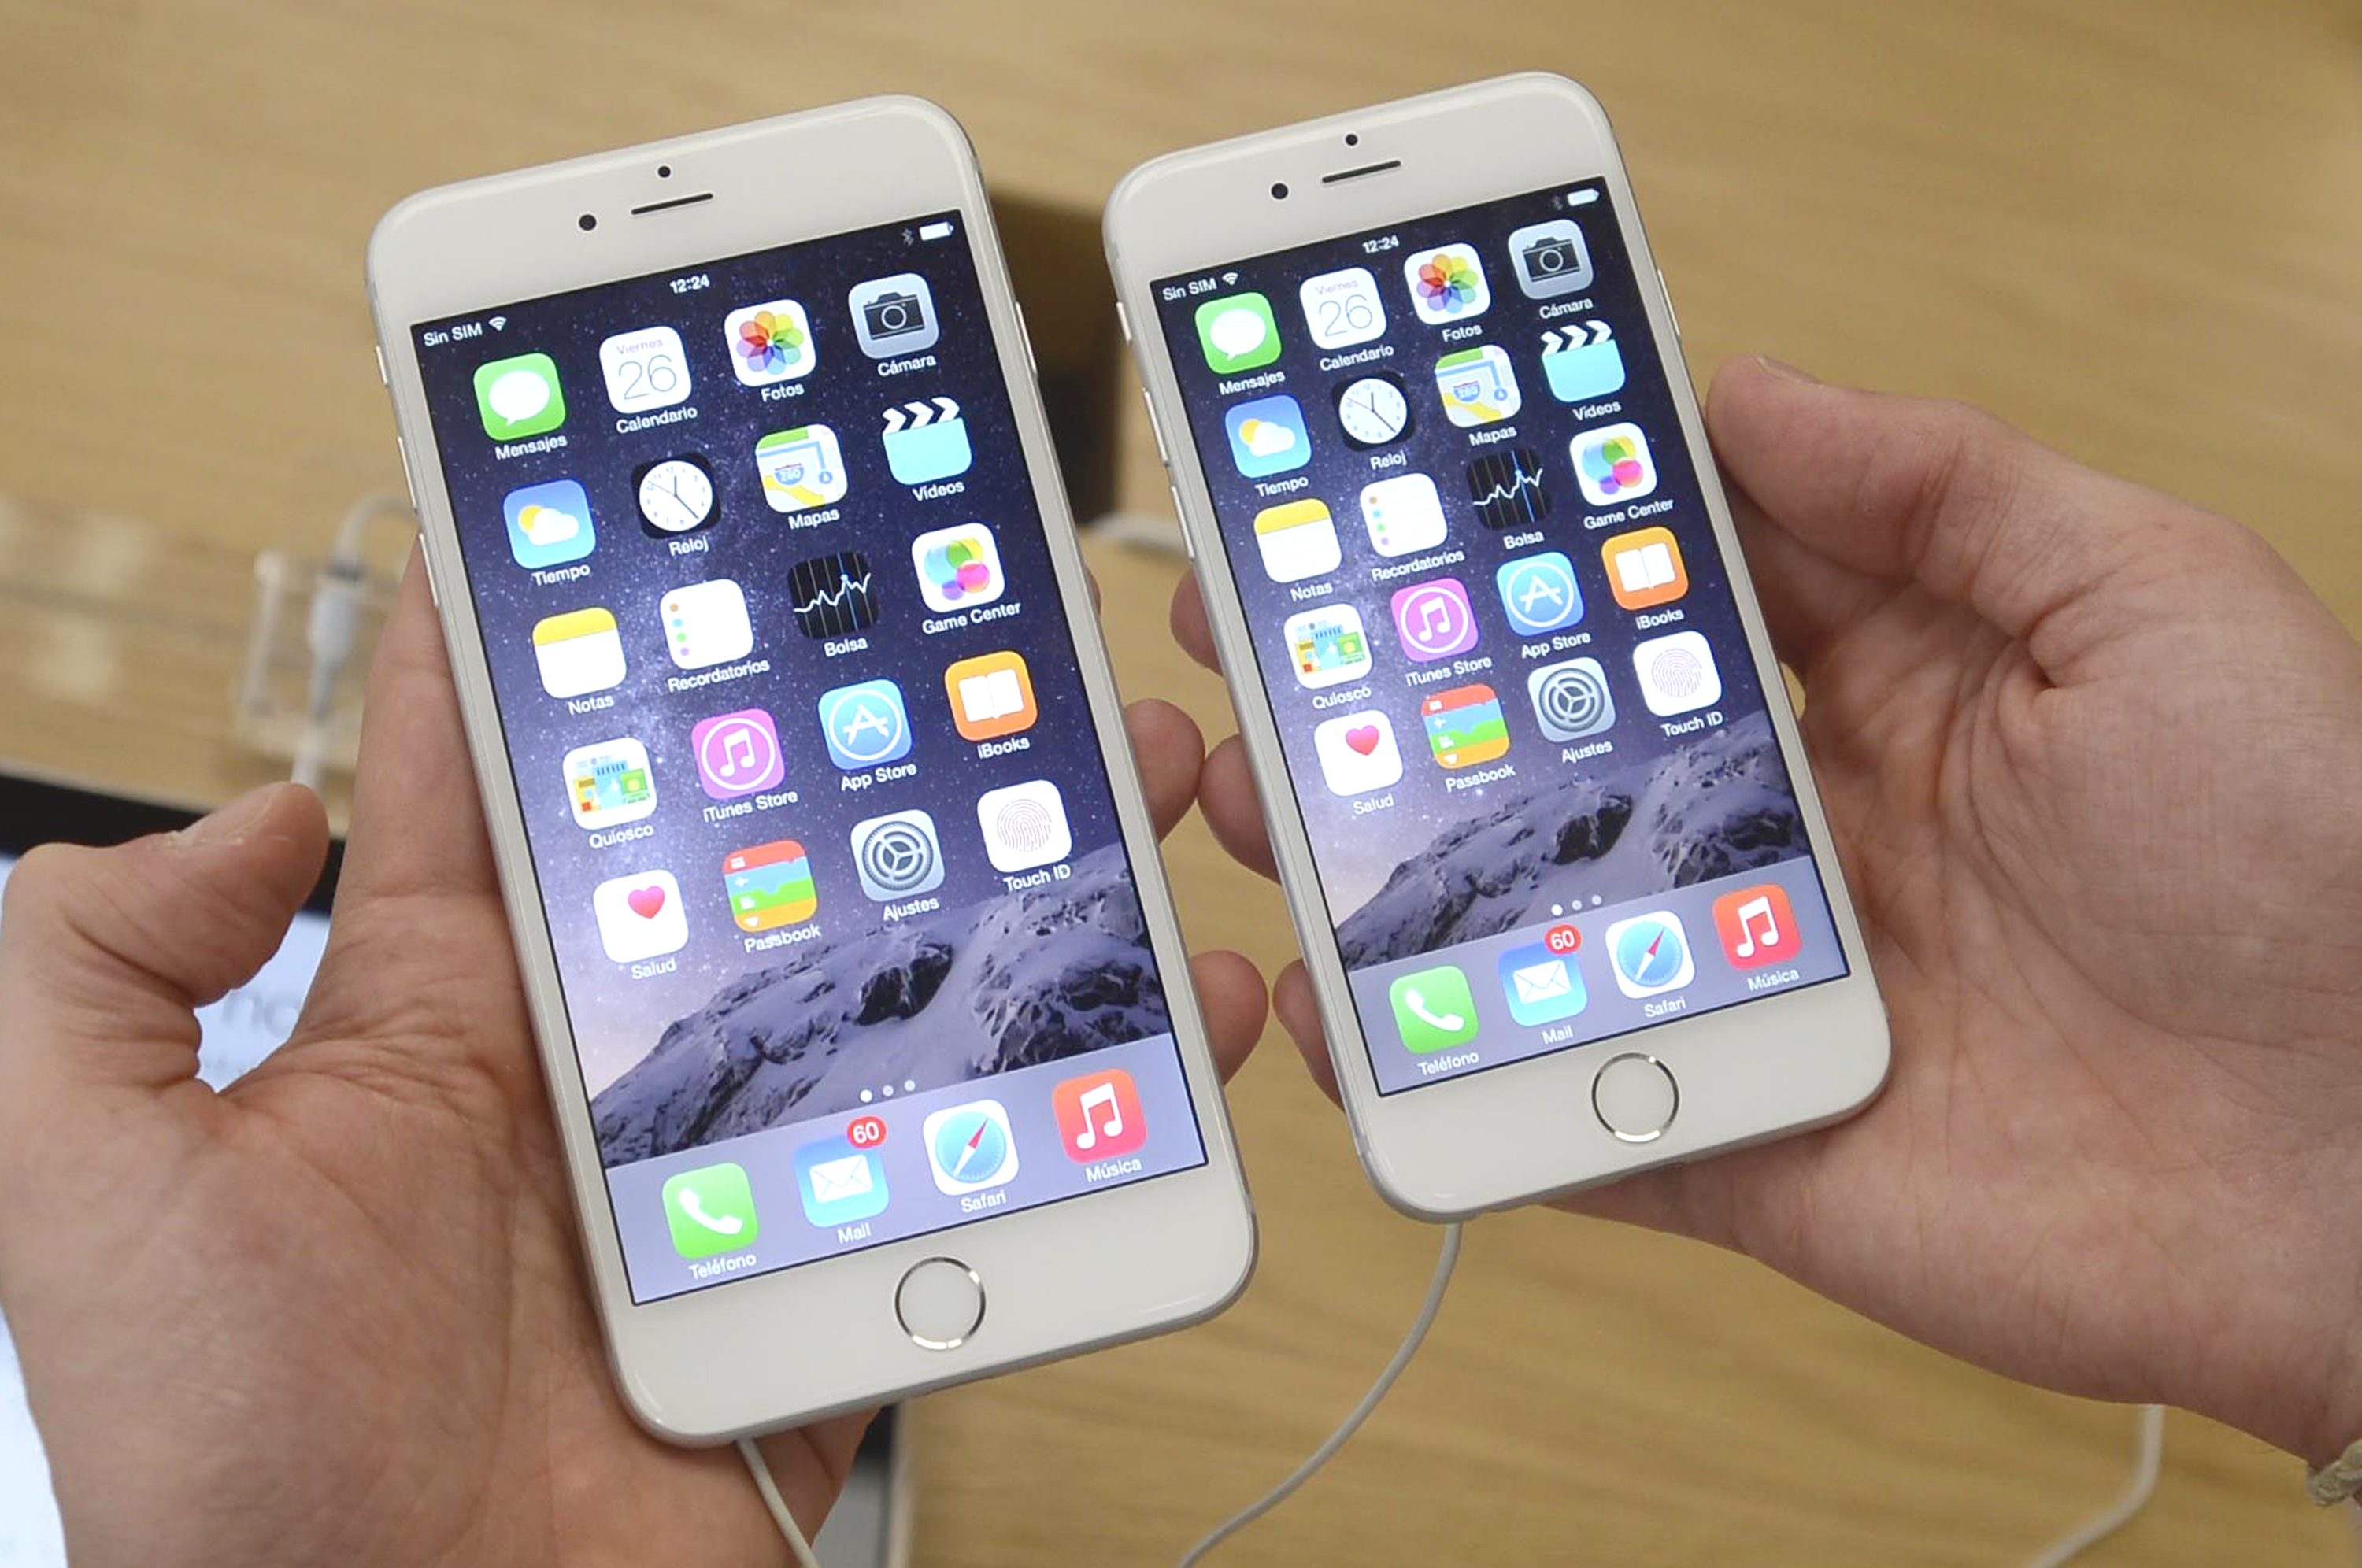 Apple's iPhone 6 Plus and iPhone 6, launched on Sept. 19, 2014. Photographer: Evrim Aydin/Anadolu Agency via Getty Images